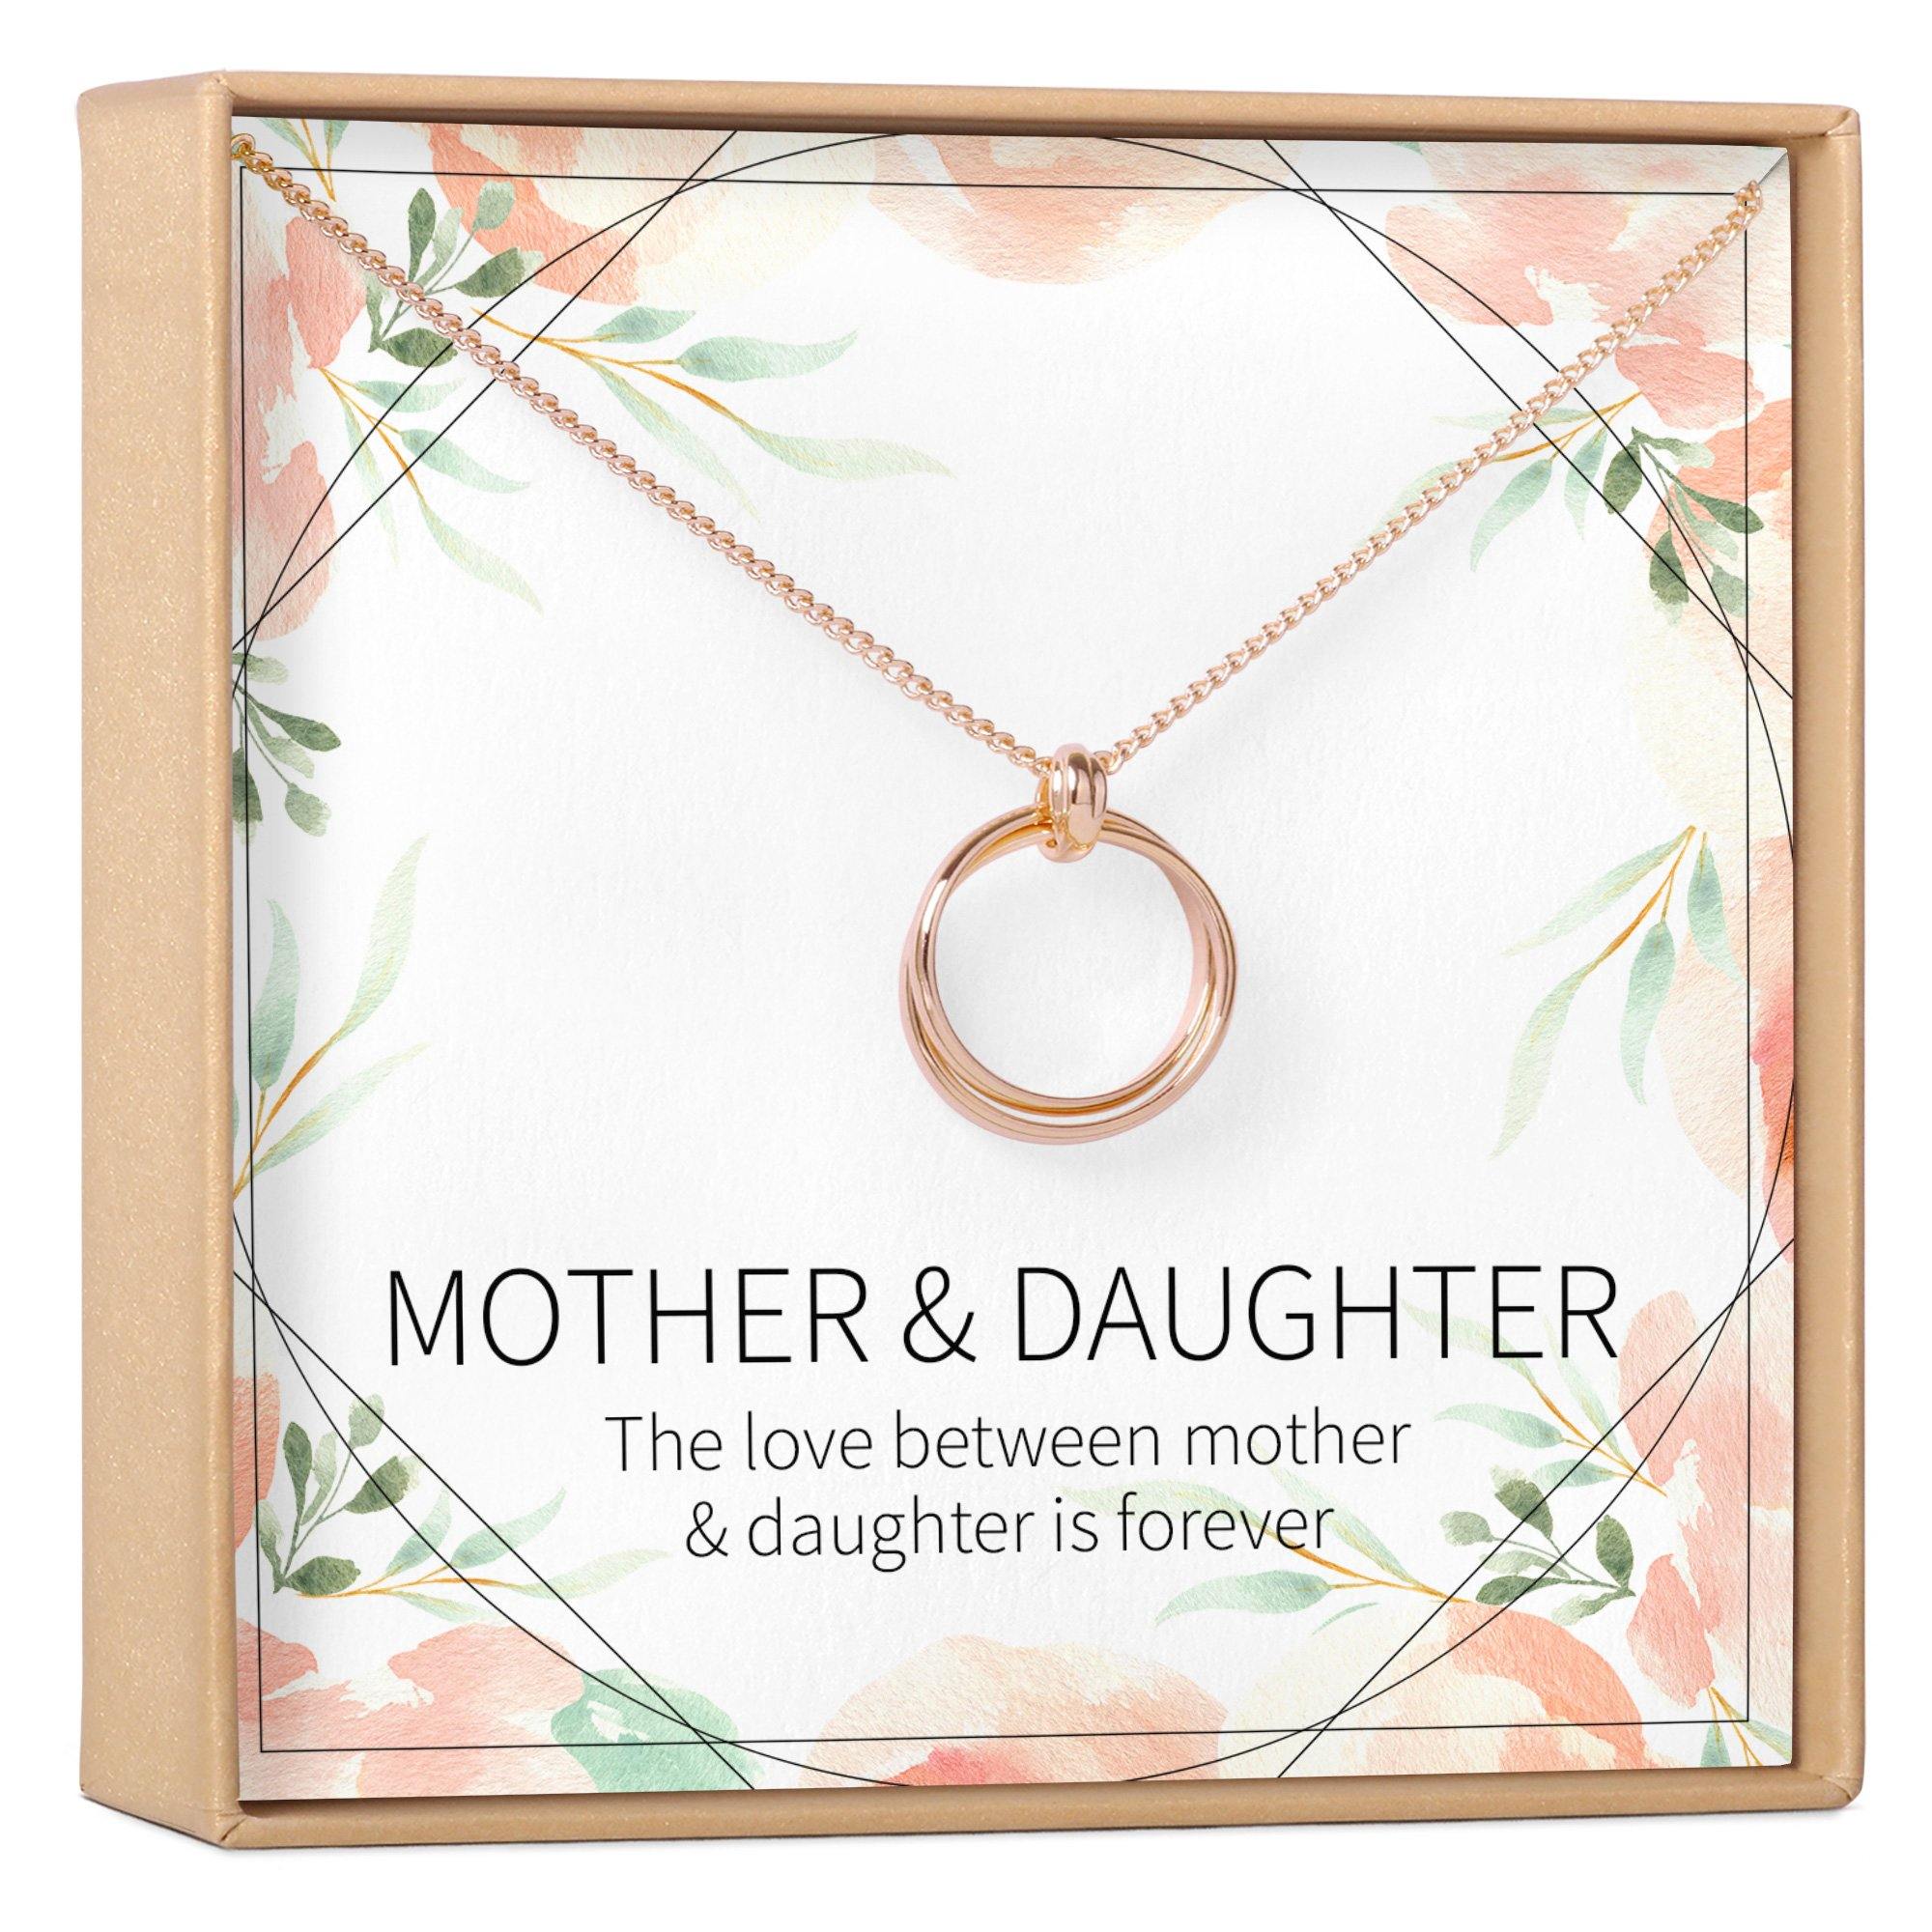 Matching Necklaces - Mother Daughter Jewelry Set